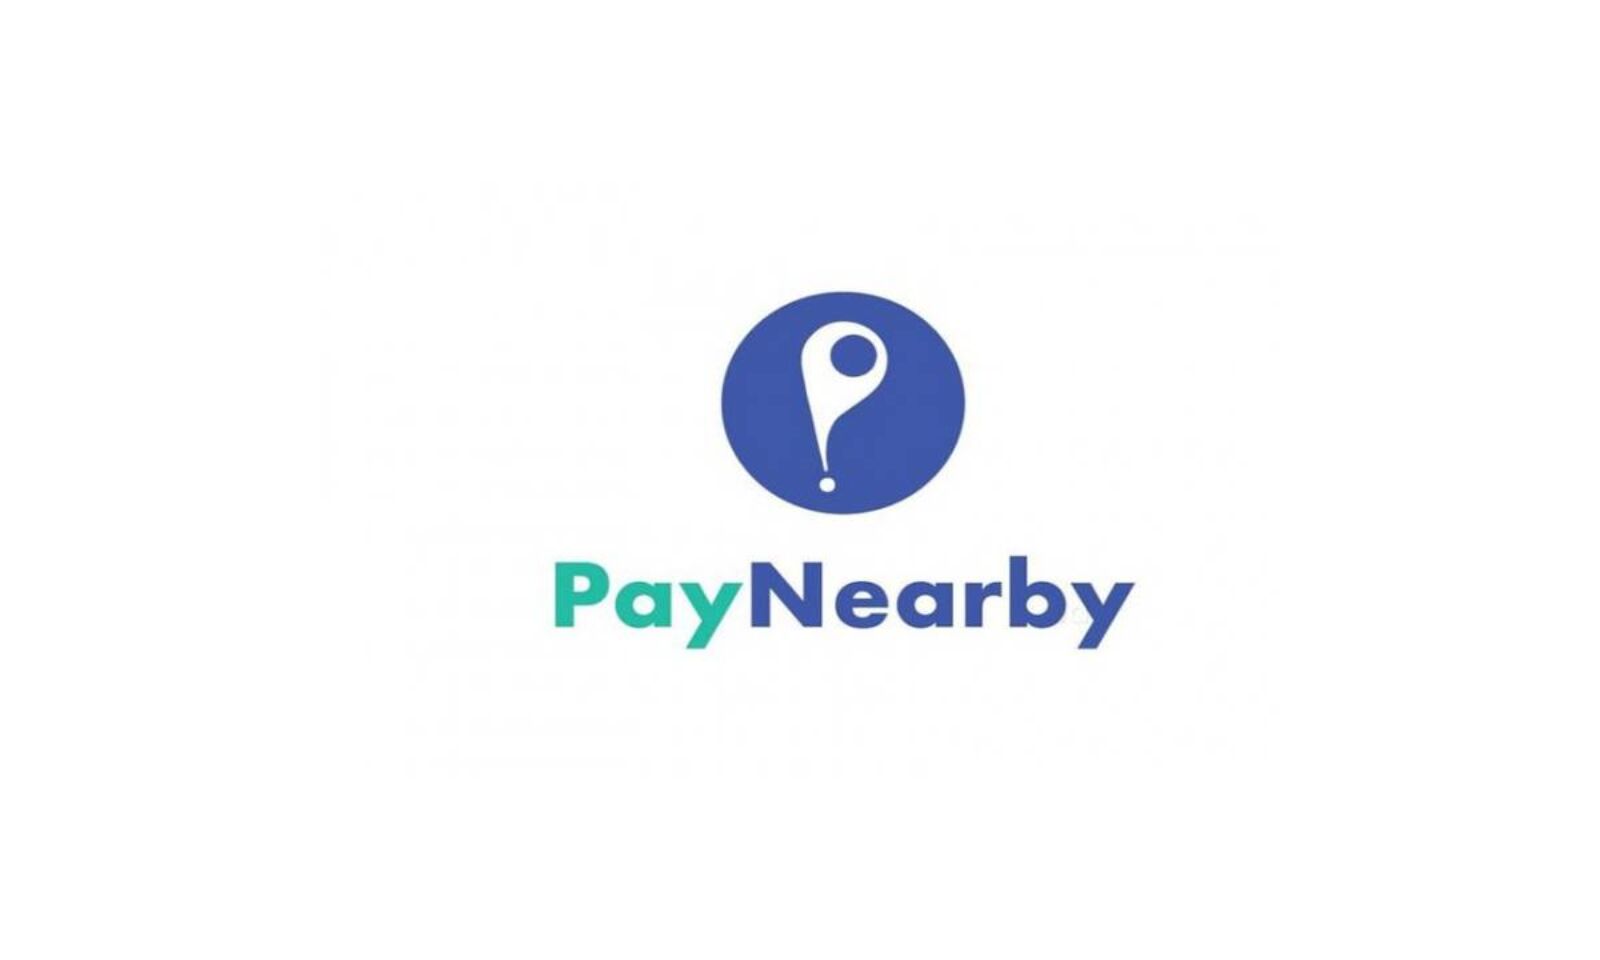 Paynearby Images Download PDF - Hindi - part1 - Digiforum Space